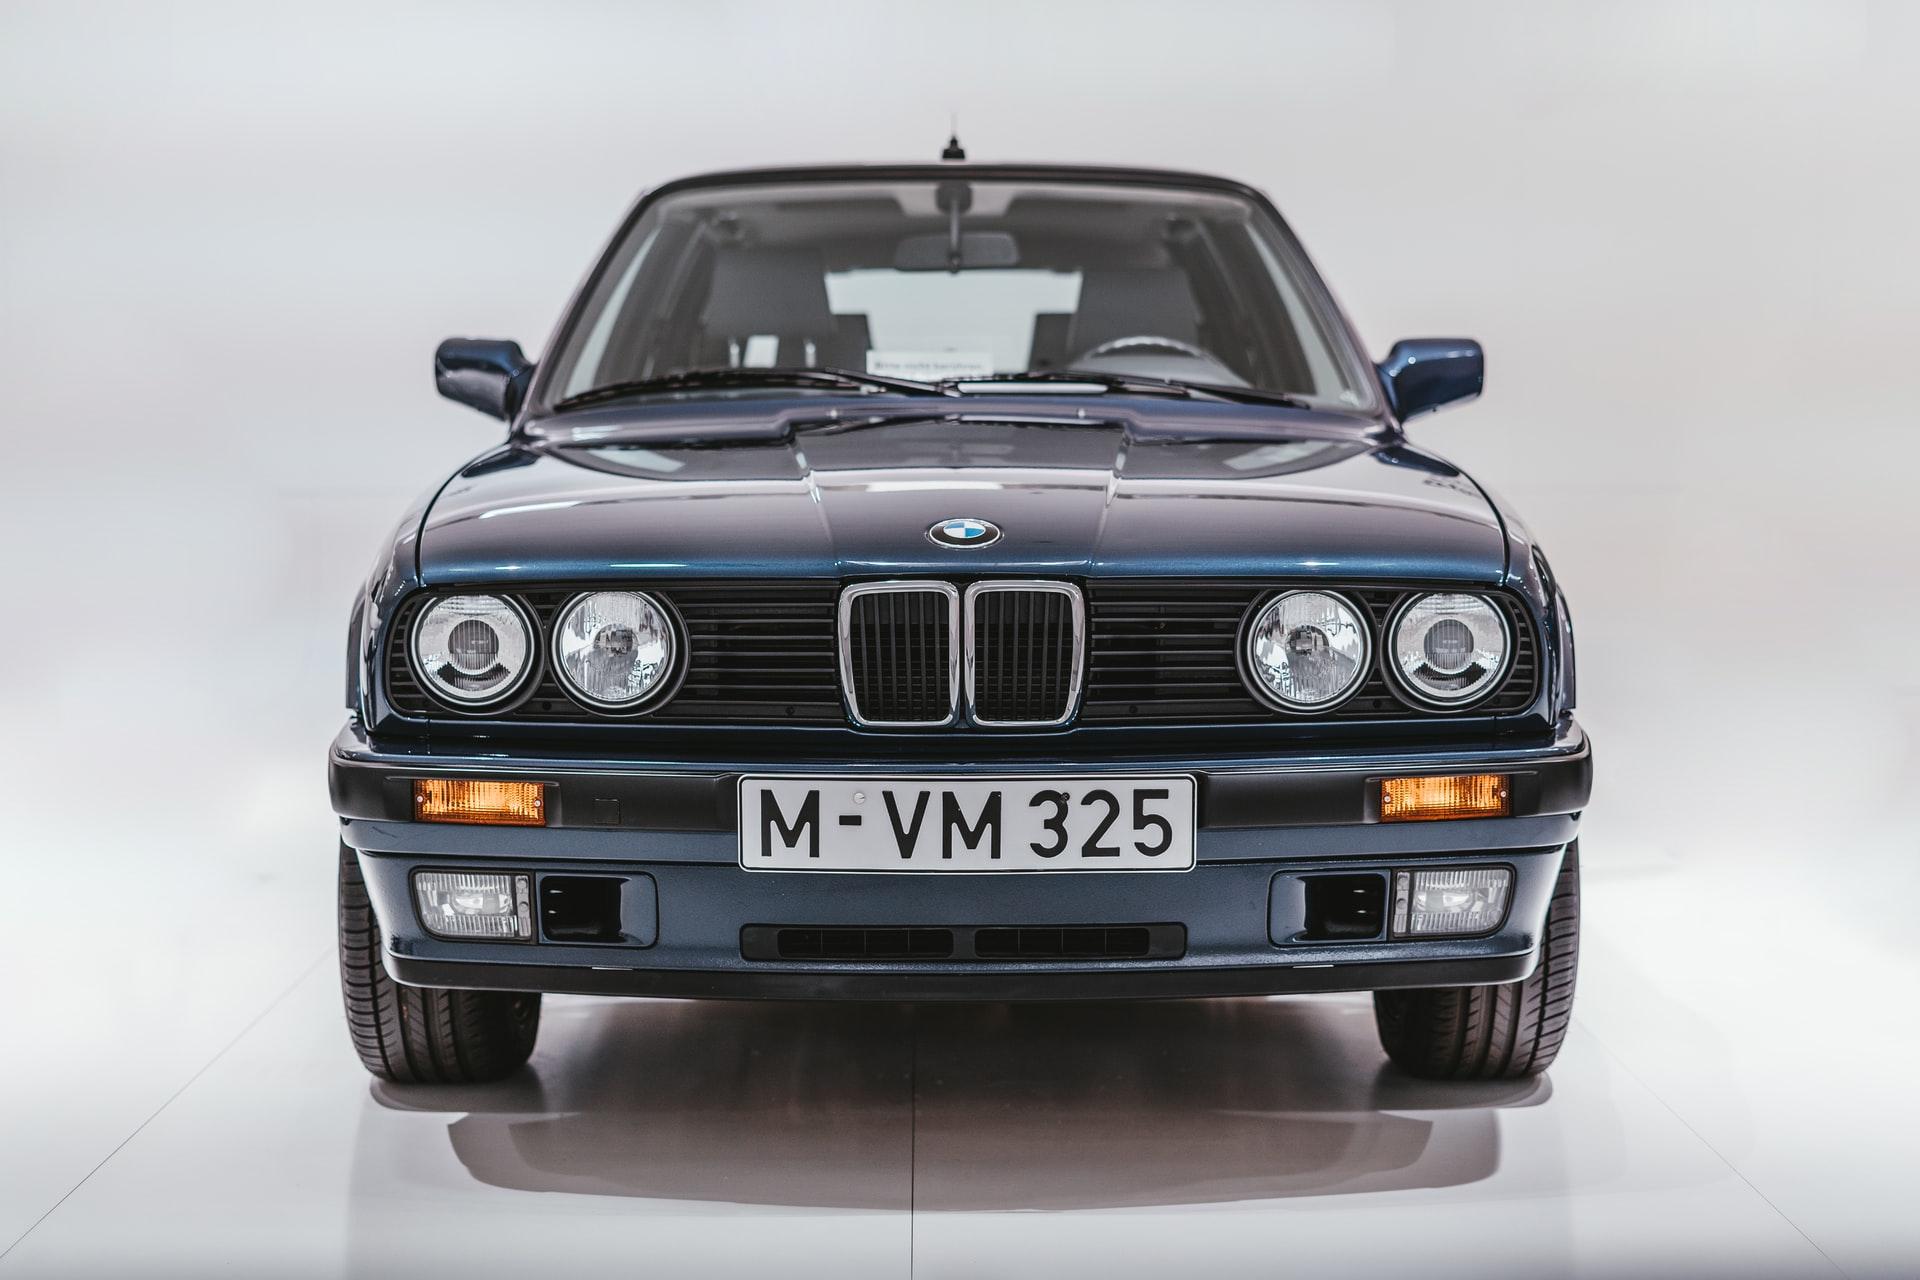 Tupac was killed in a mid-model BMW that is posted for sale to the public.